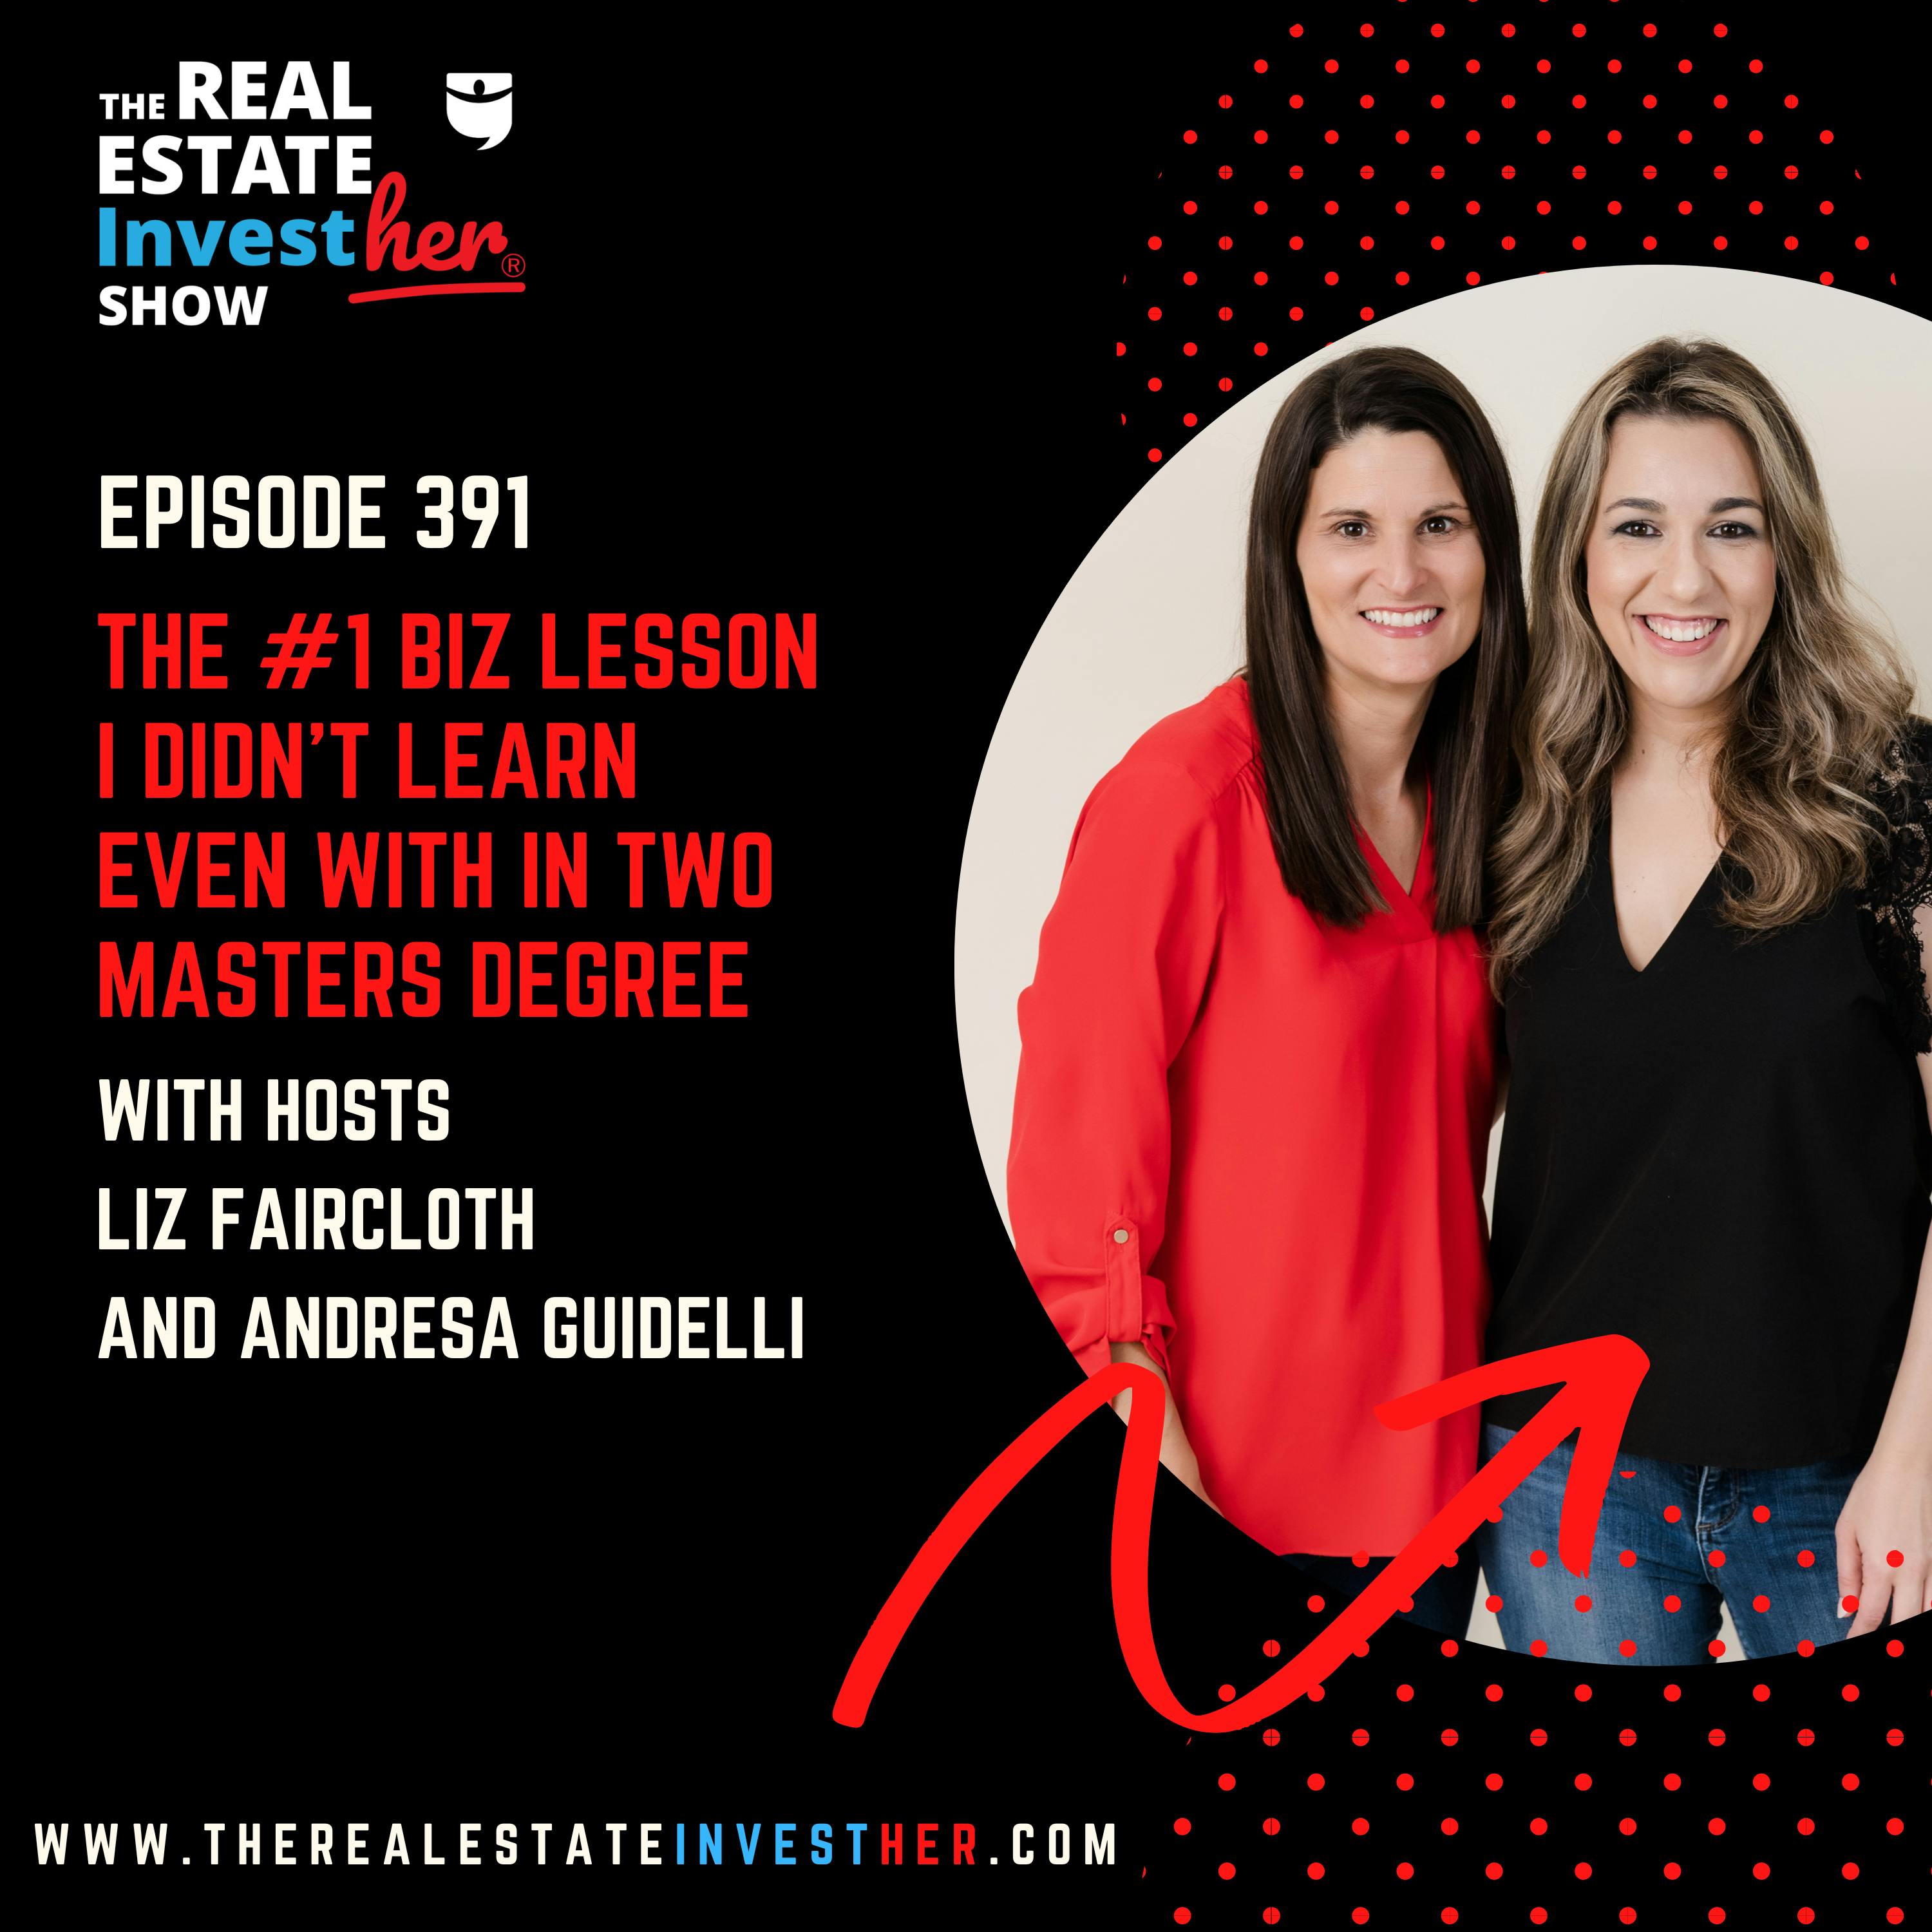 The #1 Biz Lesson I Didn't Learn Even With in Two Masters Degrees (Minisode)